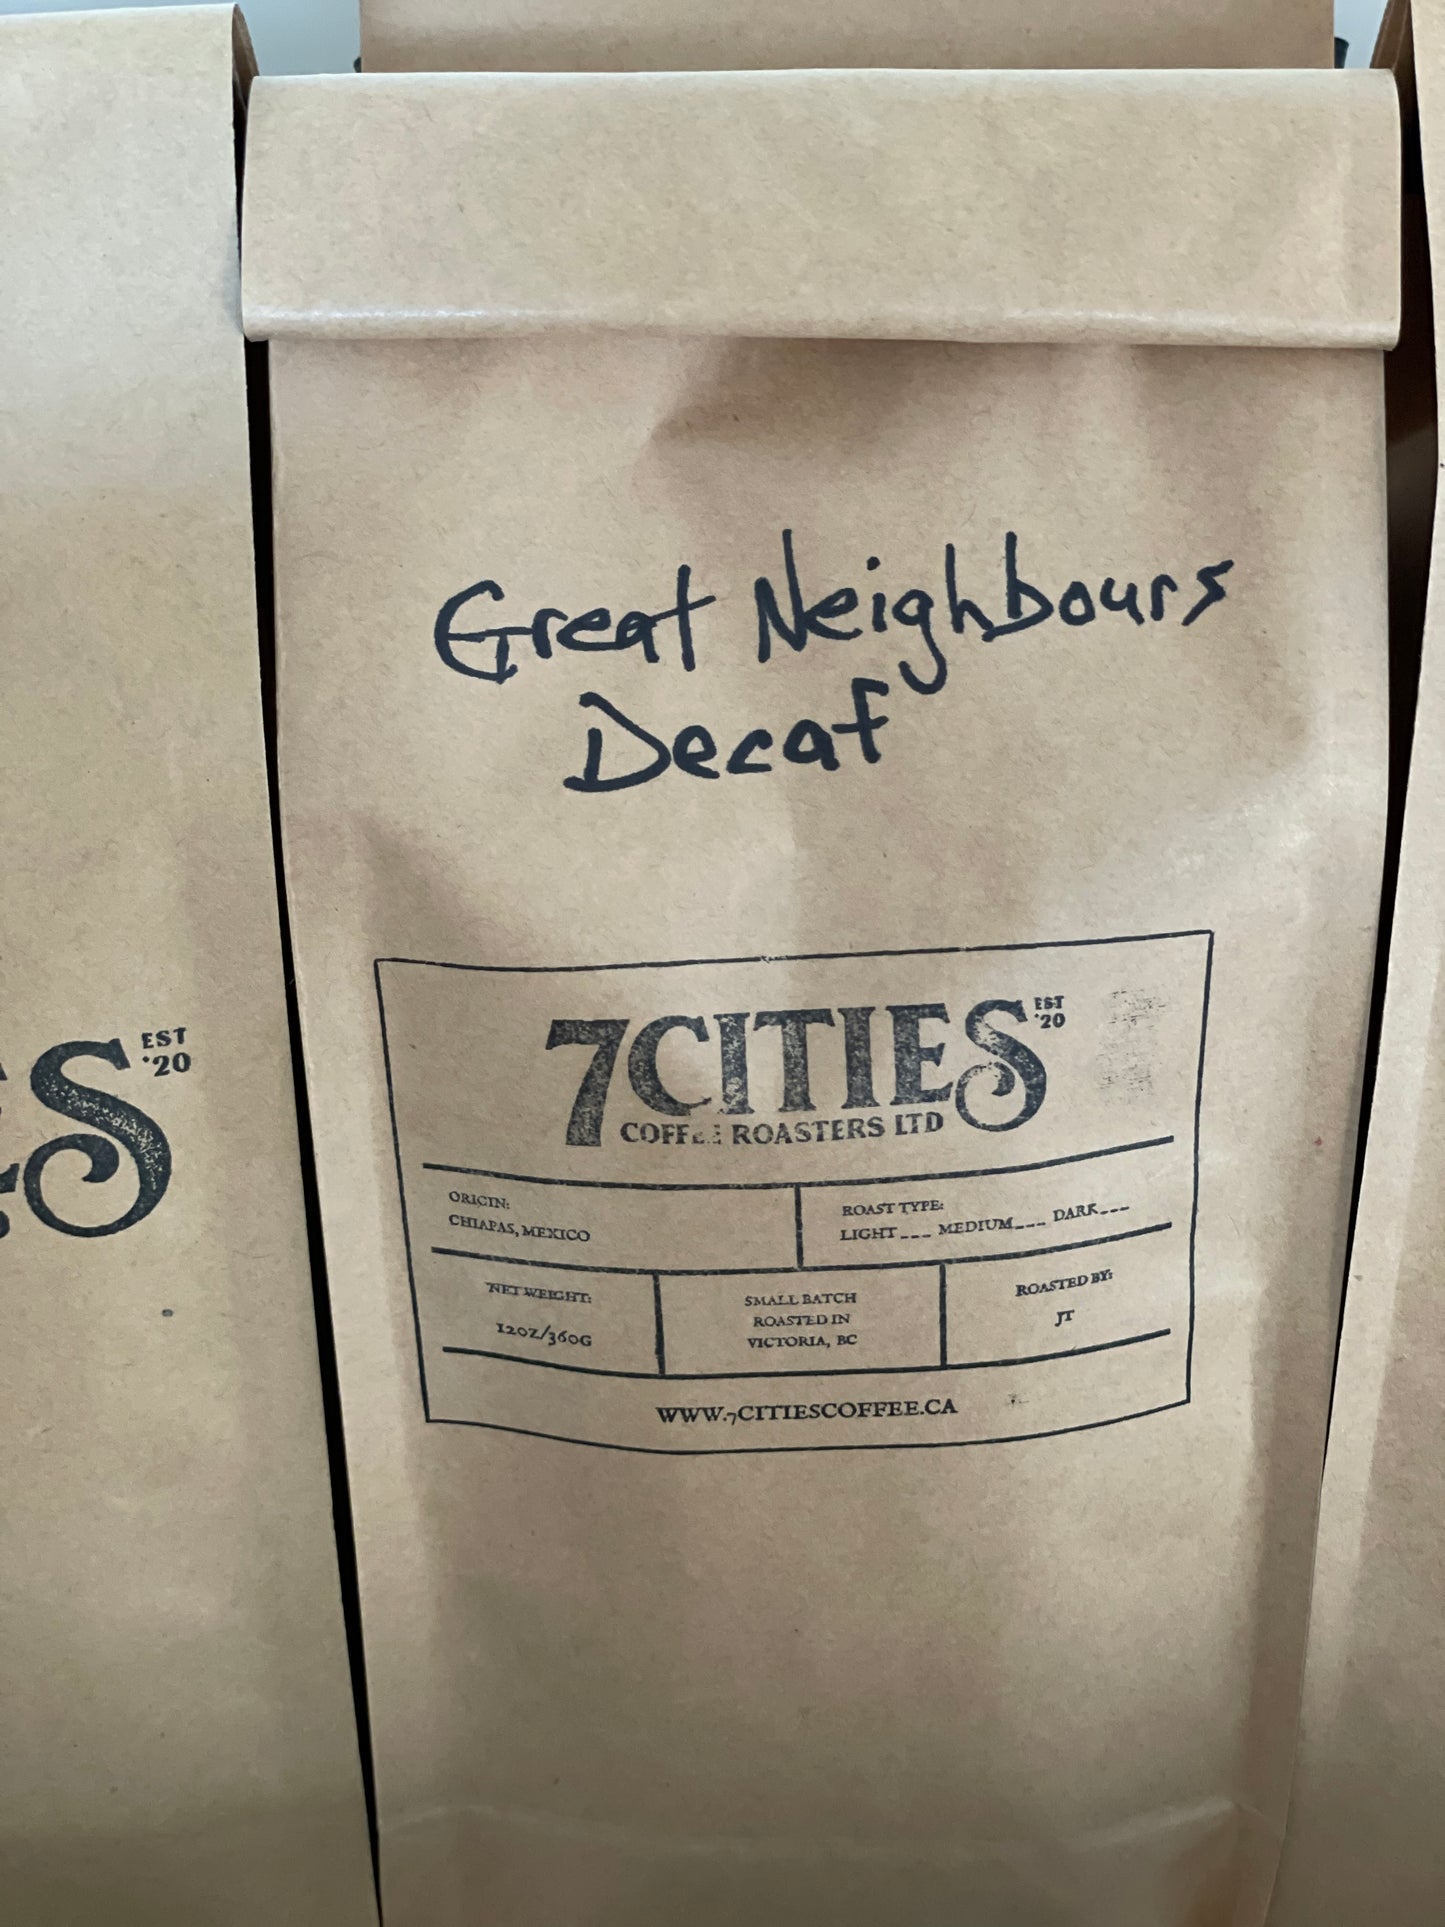 Great Neighbours Decaf